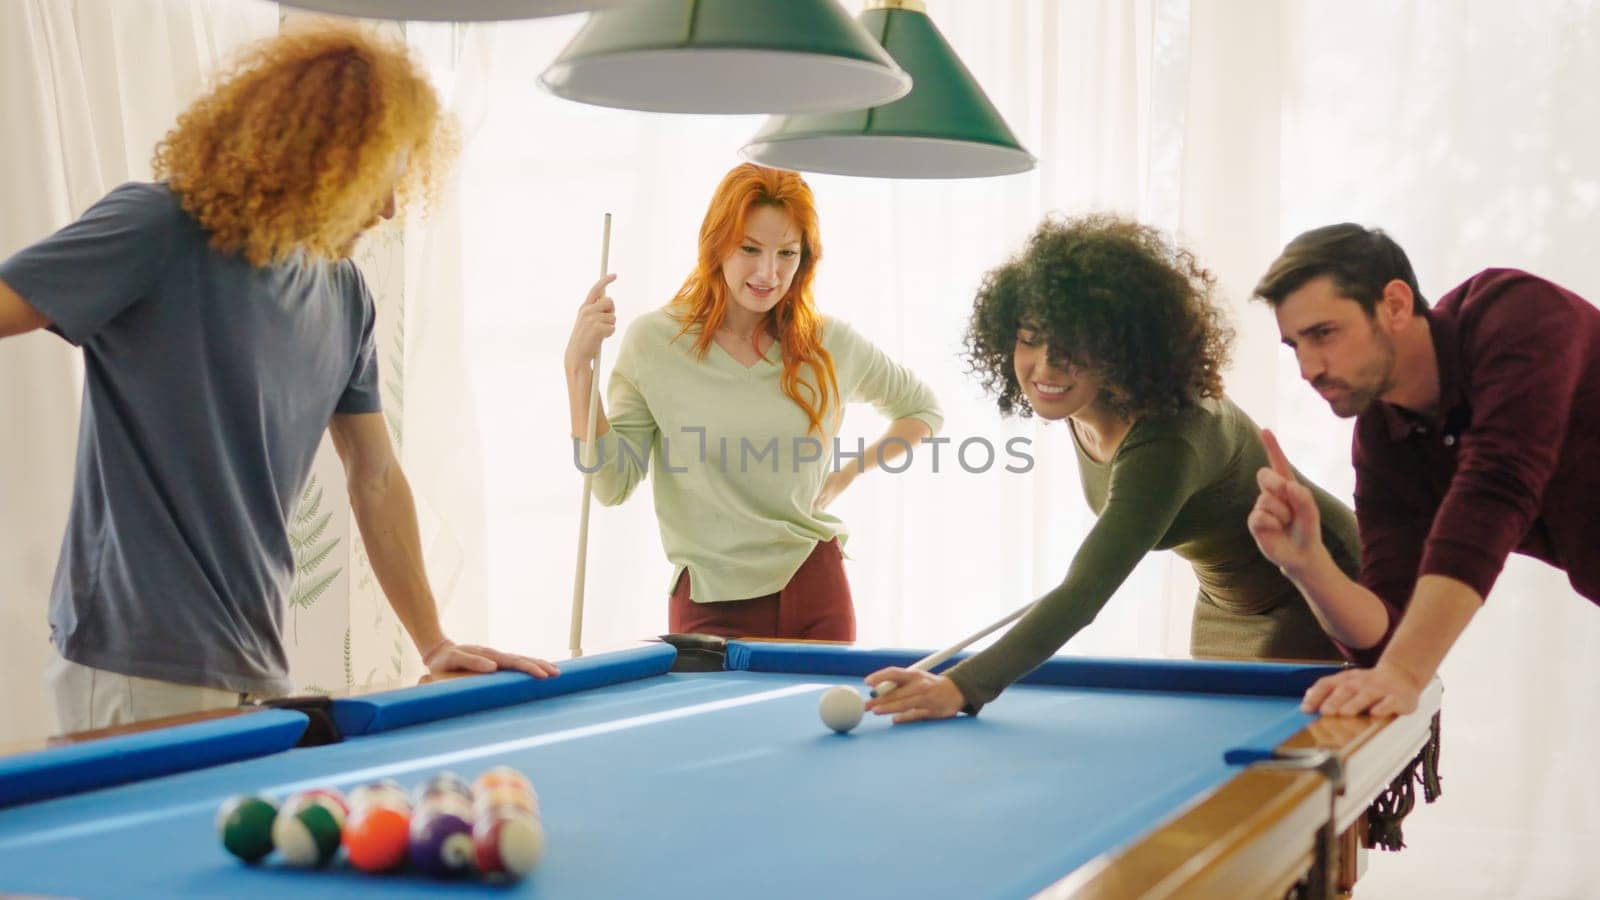 A beginner player hitting a billiard ball and laughing happy next to friends